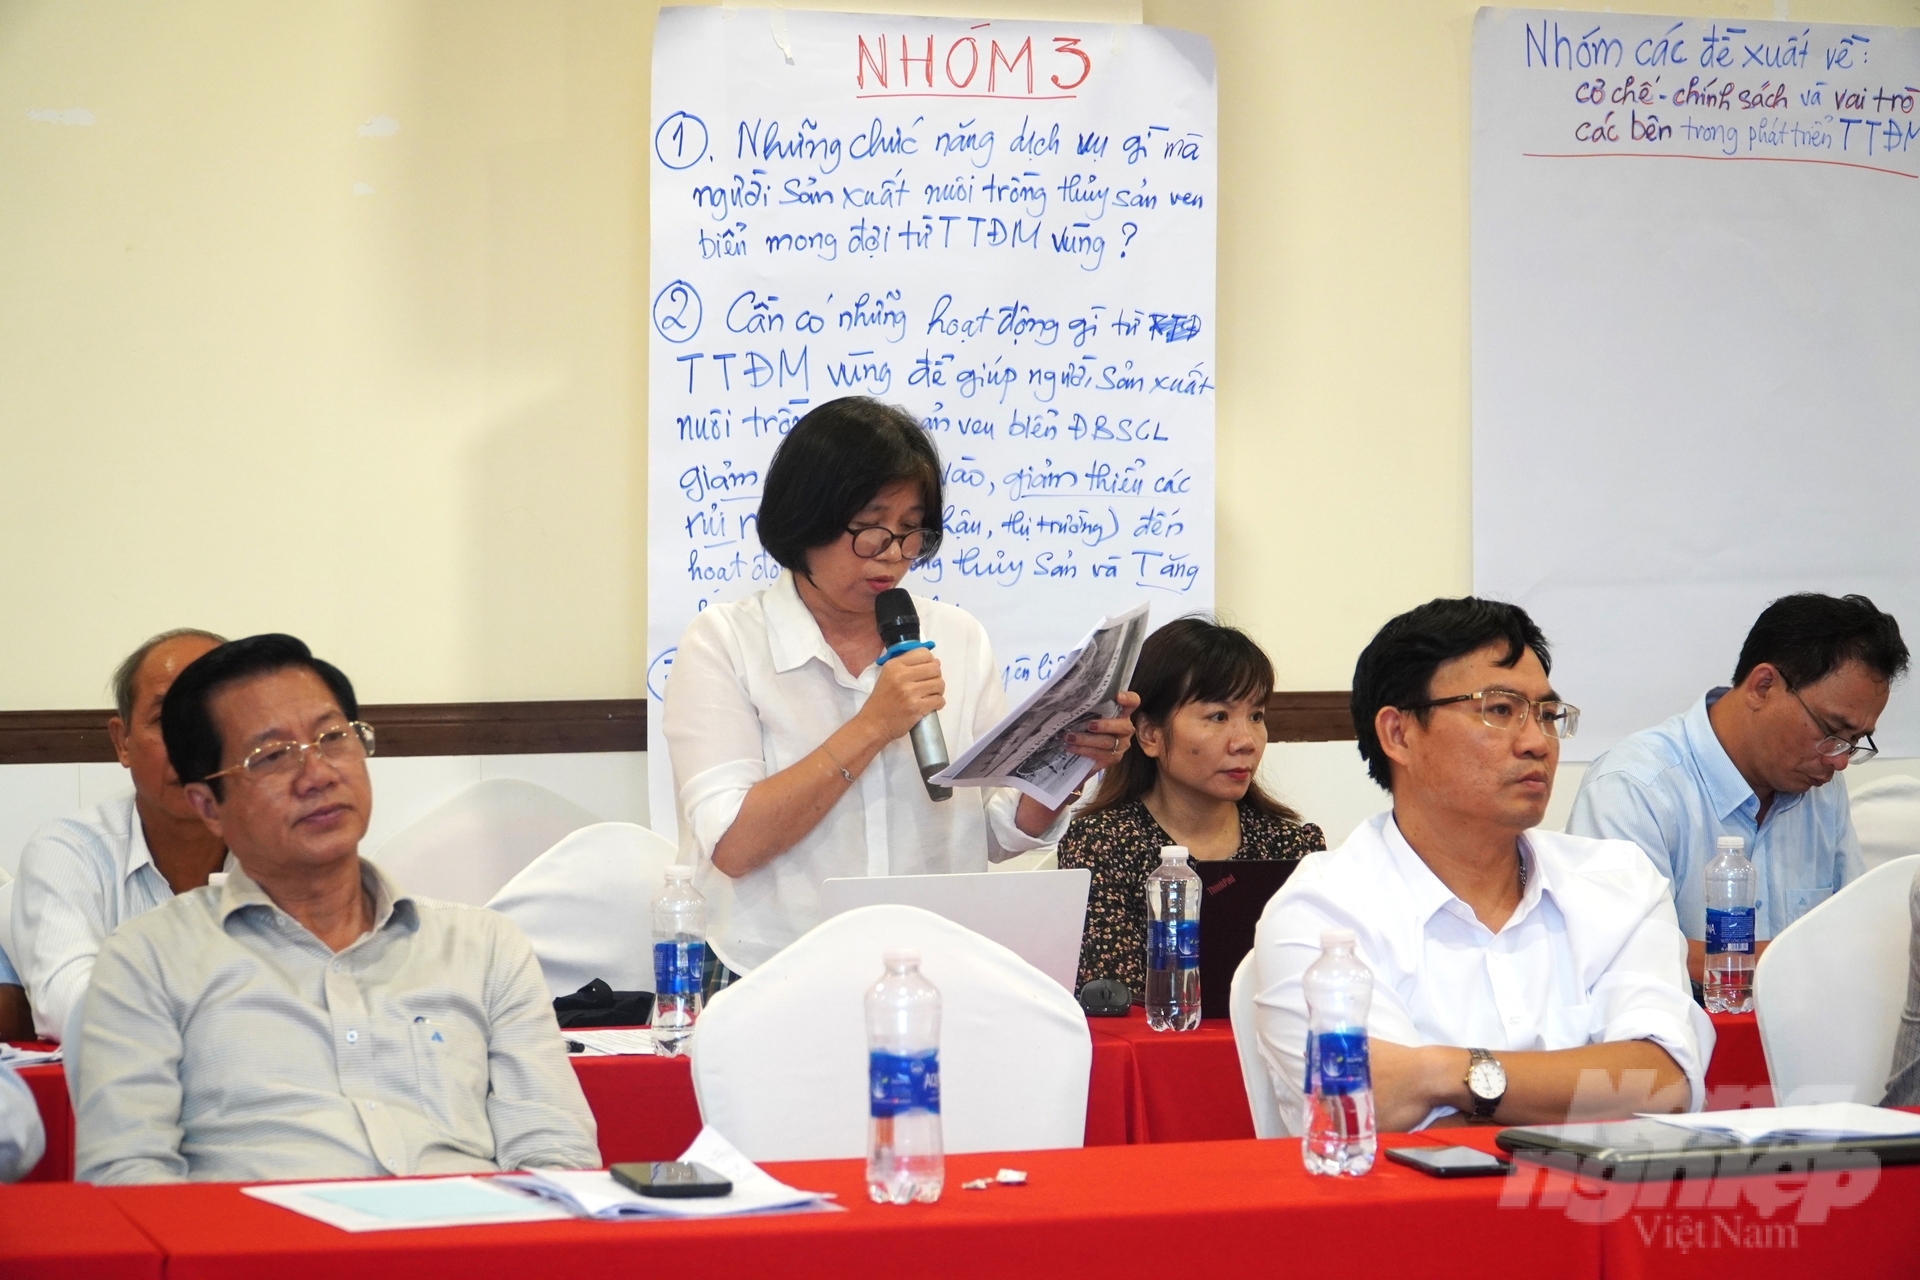 Delegates commented on developing the 'Project of focal centers in Kien Giang, Ca Mau and Soc Trang associated with aquatic raw materials in coastal areas'. Photo: Kim Anh.